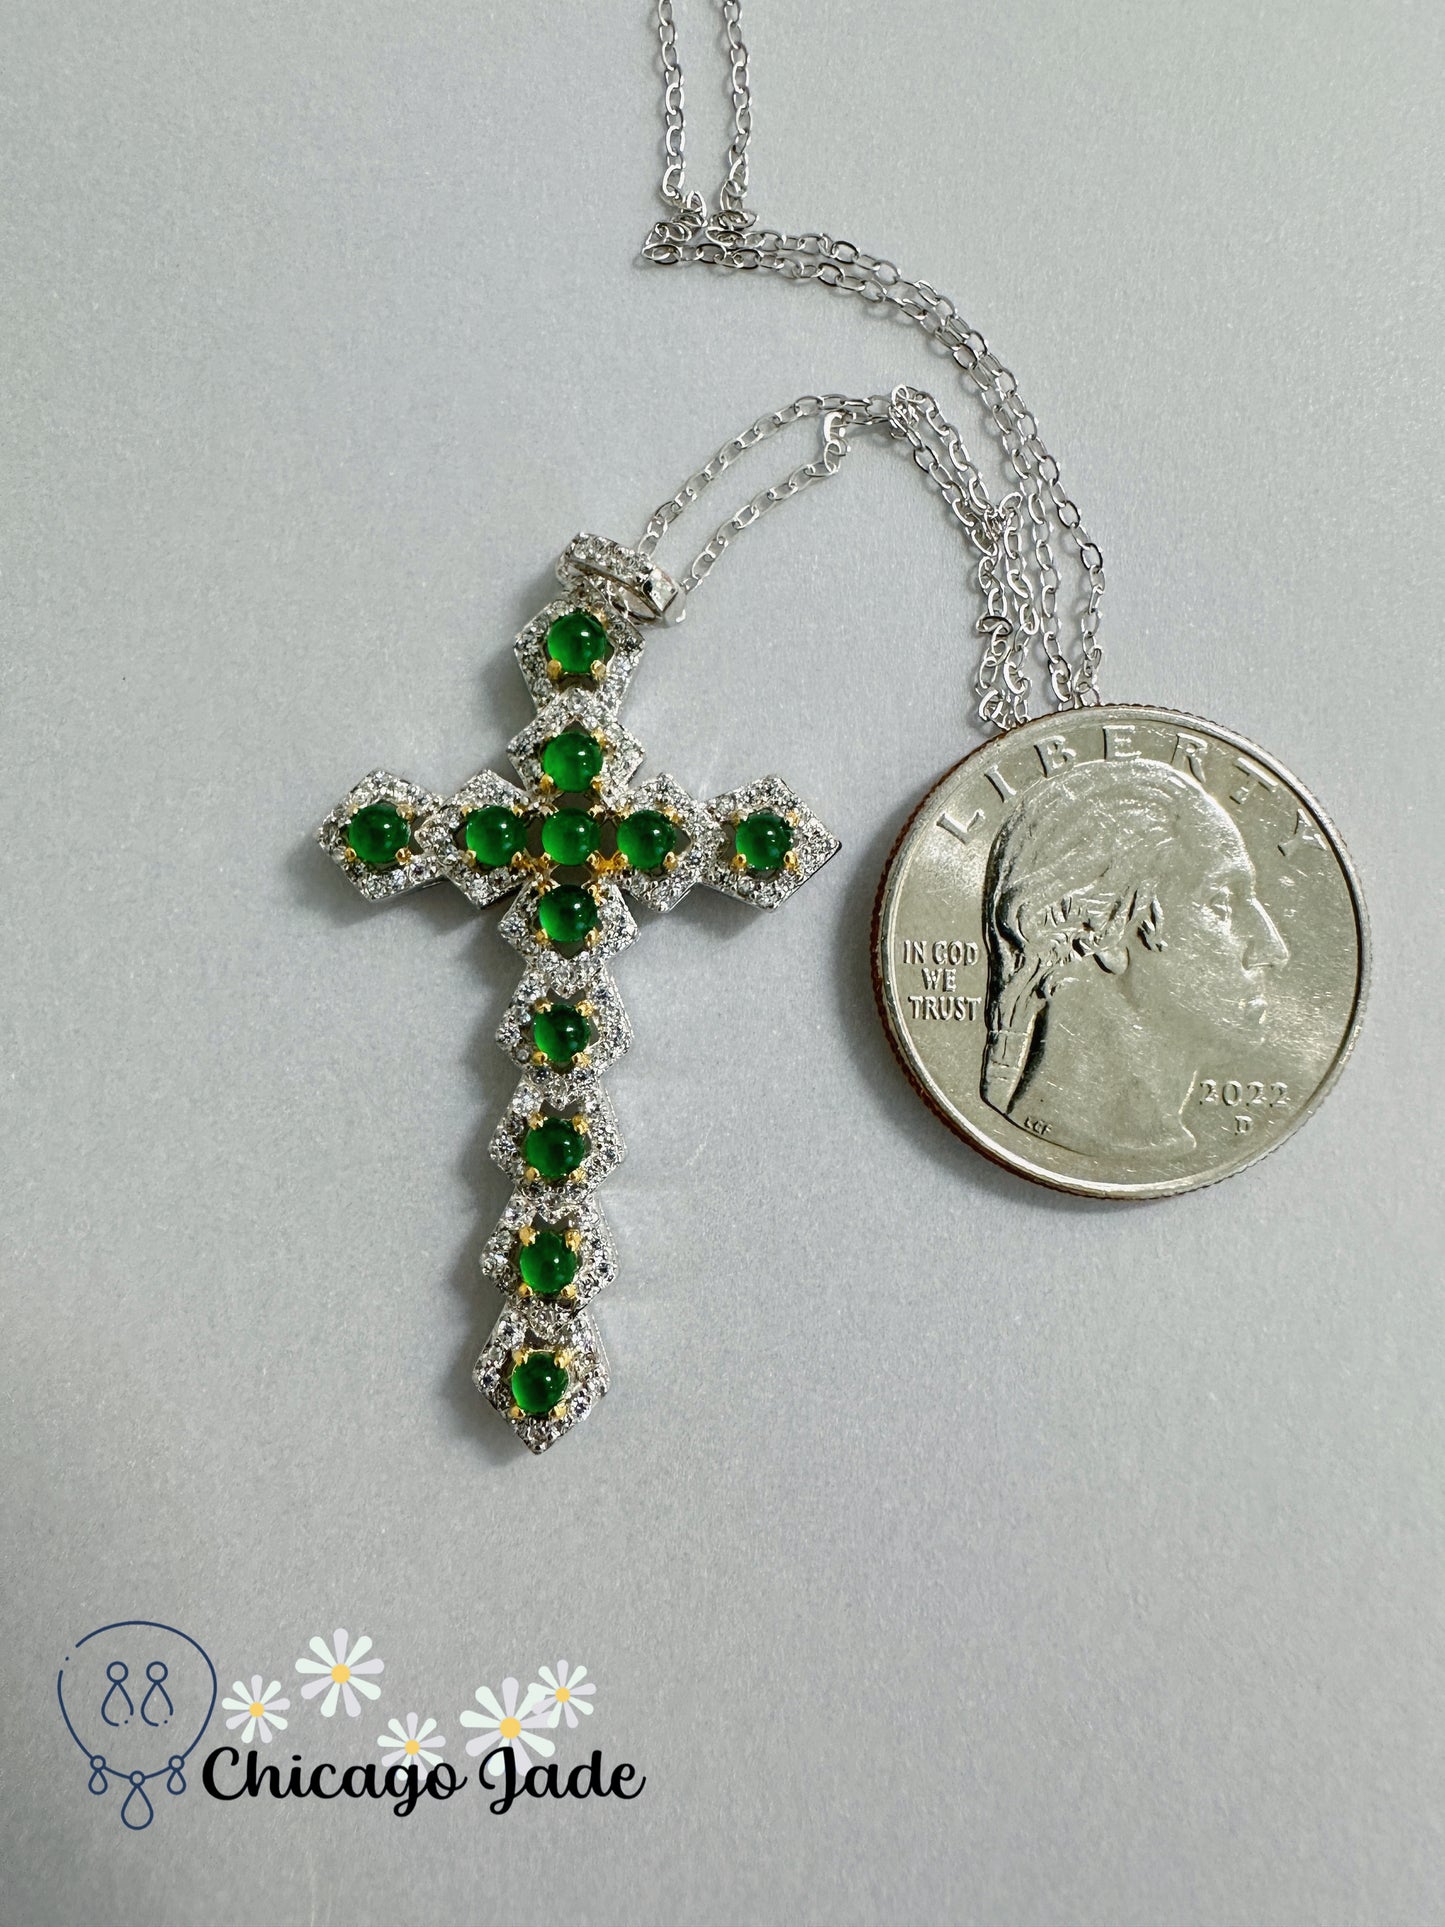 Green Crystal Cross Necklace with Jade Stone Pendant and Sterling Silver Chain, Handmade Elegant Gift